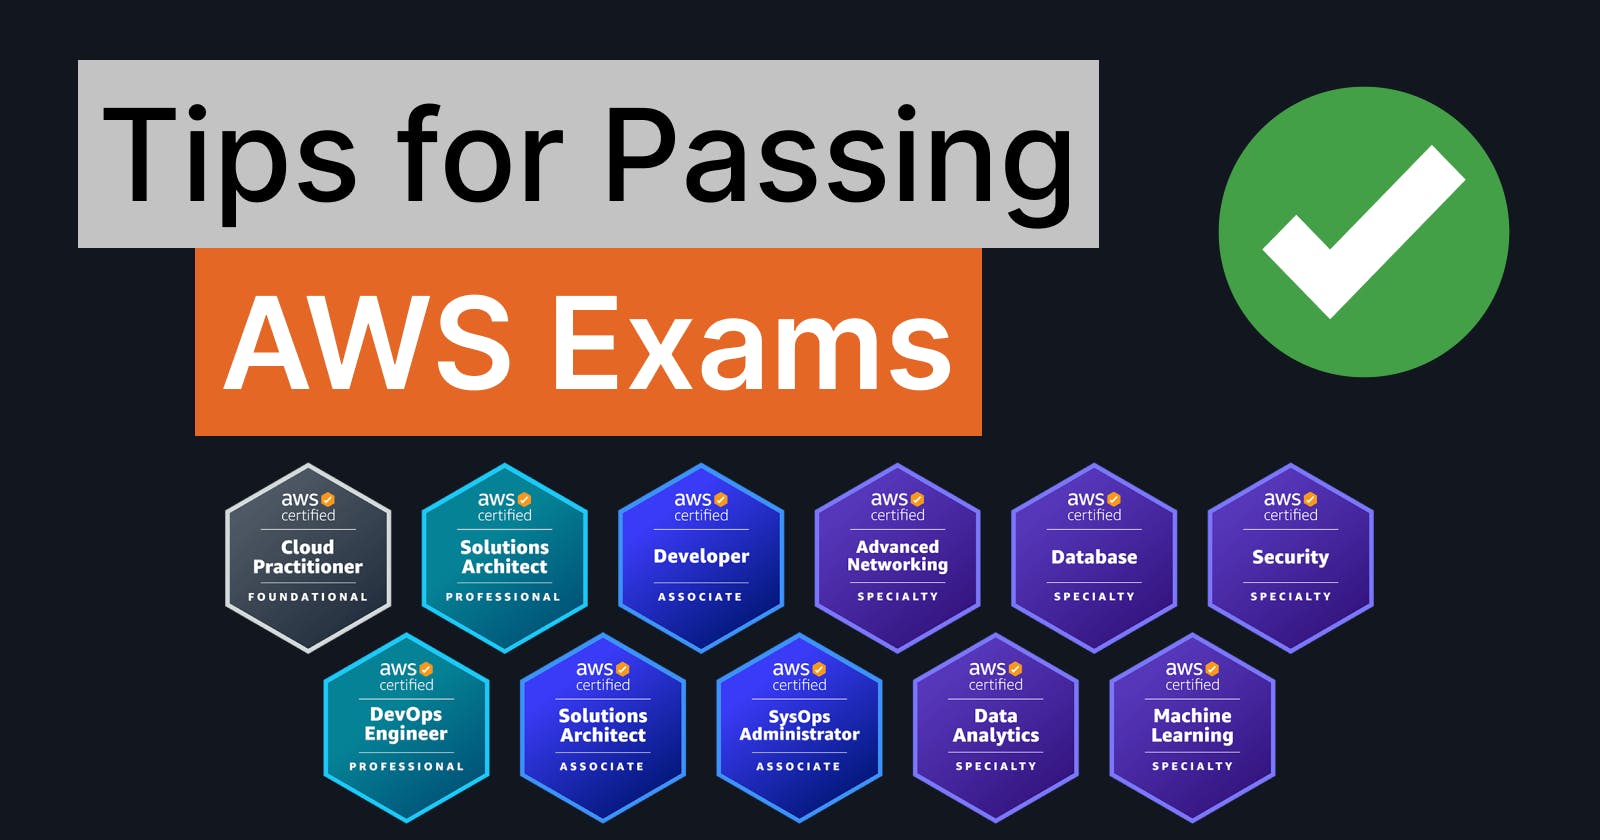 Tips for Passing AWS Certification Exams Like a Boss